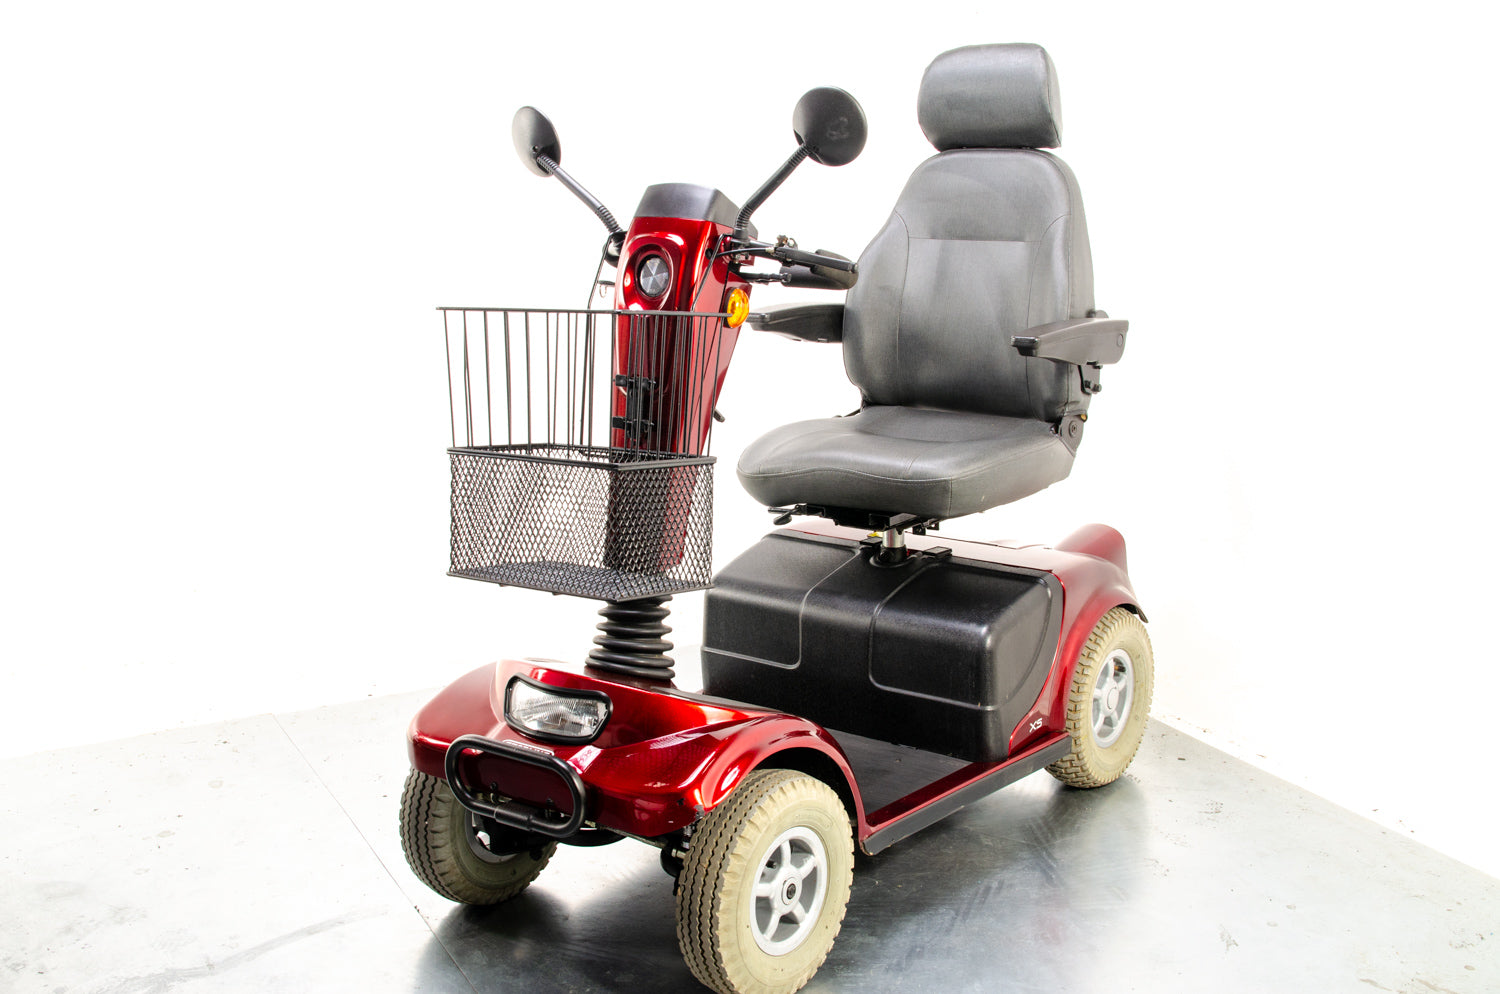 Sunrise Medical Elite XS Used Mobility Scooter 8mph Large All-Terrain Comfy Red